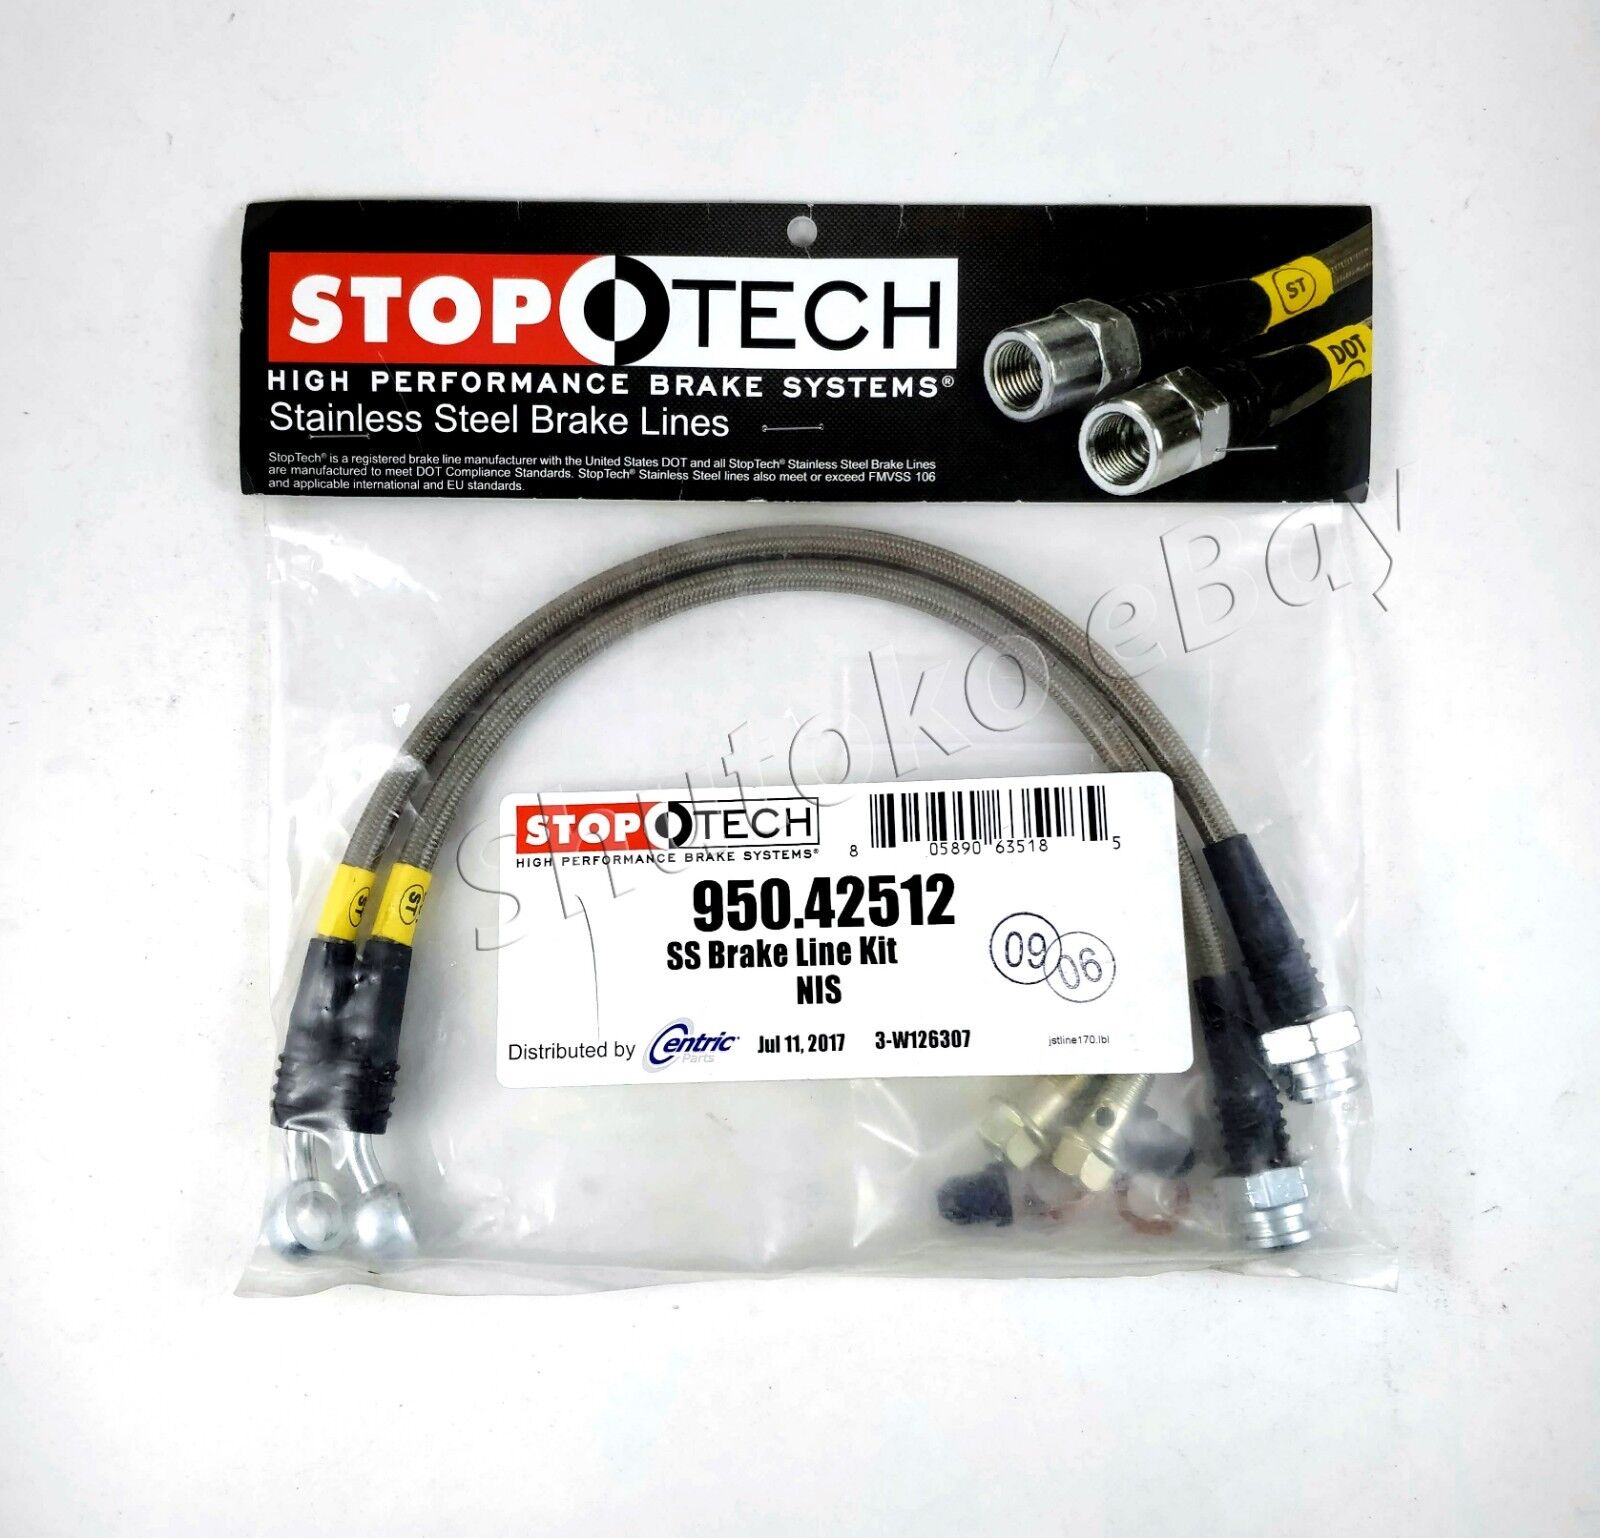 STOPTECH STAINLESS STEEL REAR BRAKE LINES FOR 09-UP NISSAN GTR GT-R SKYLINE R35